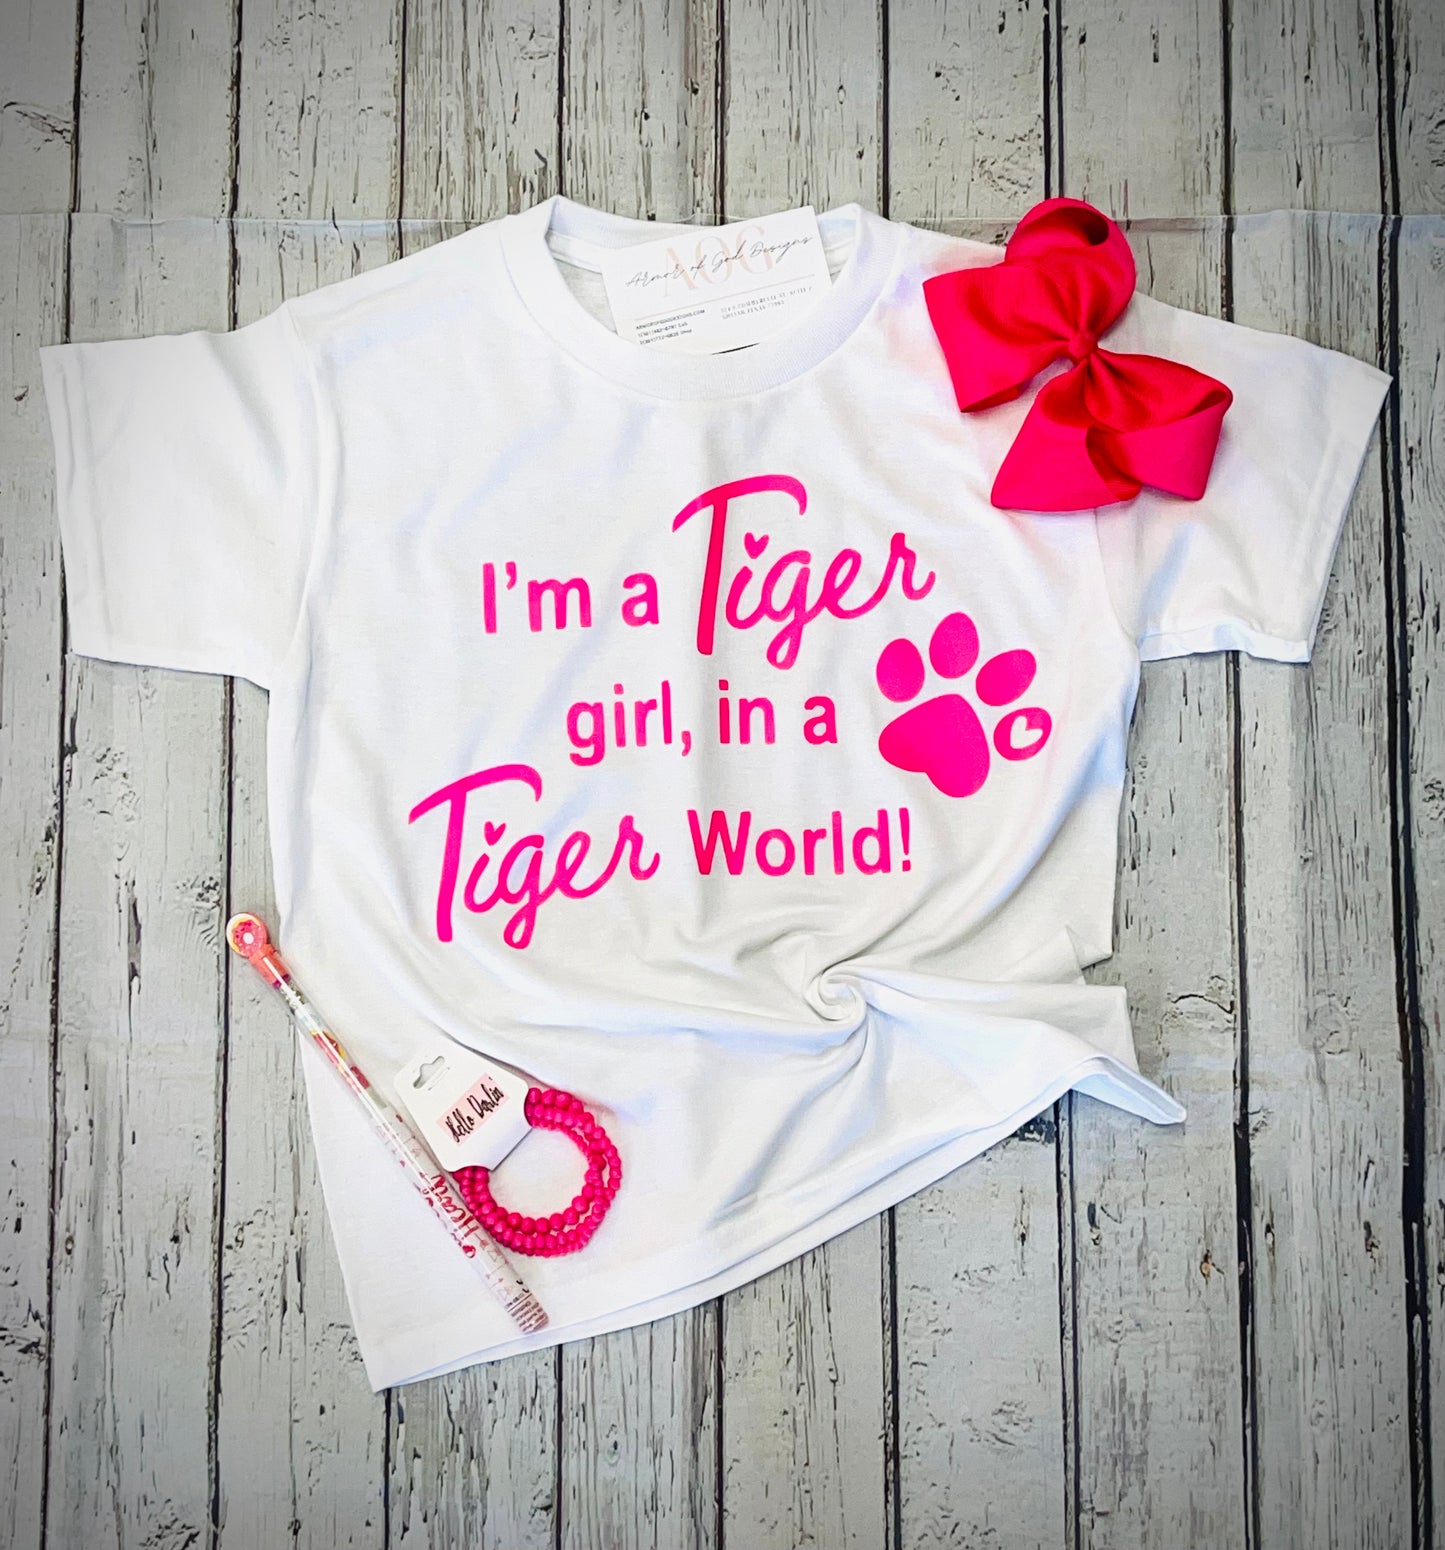 I’m a Tiger girl in a Tiger World! 🐾